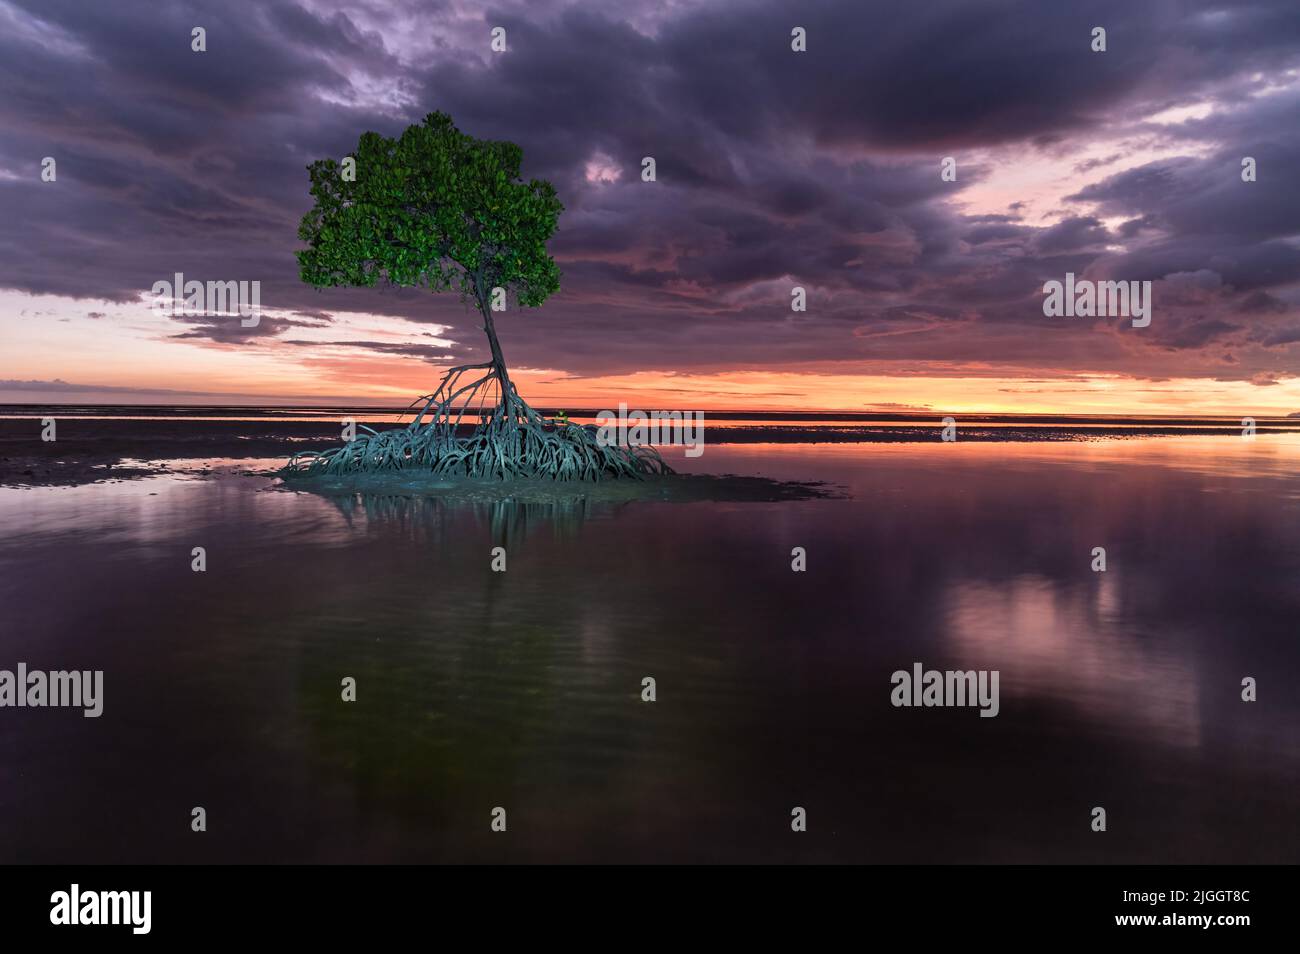 A clouded, pre-sunrise photograph of a single red mangrove tree on the mudflats at Yule point, Far North Queensland, Australia. Stock Photo